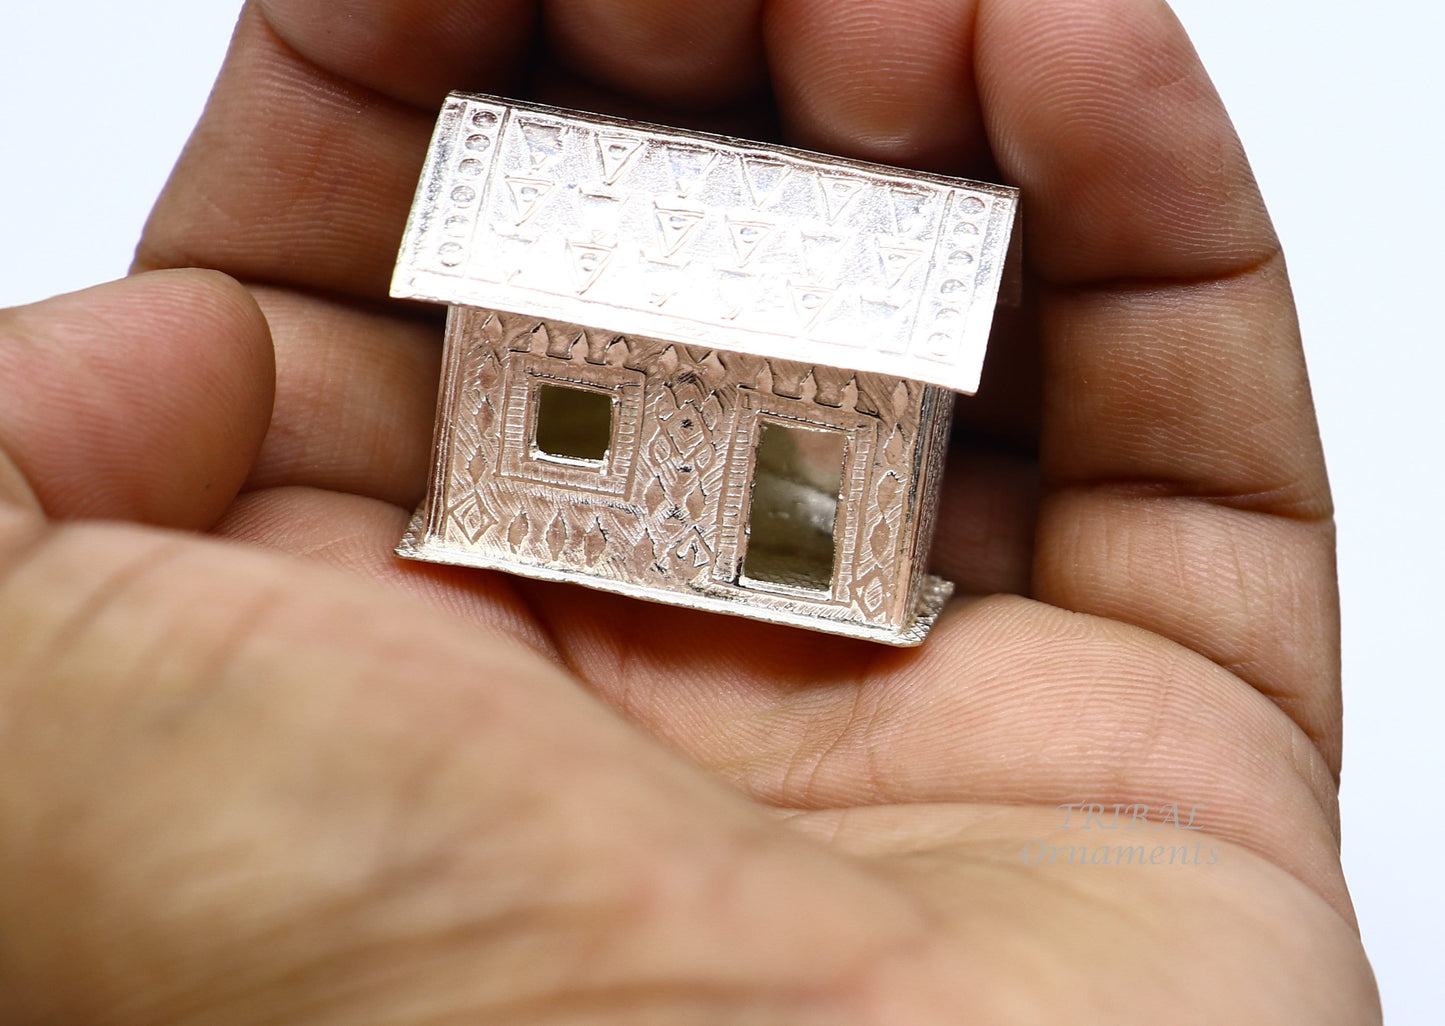 Handcrafted silver small mini home toy hut, vintage style decorative silver article, best gift puja article, temple gifting art su805 - TRIBAL ORNAMENTS